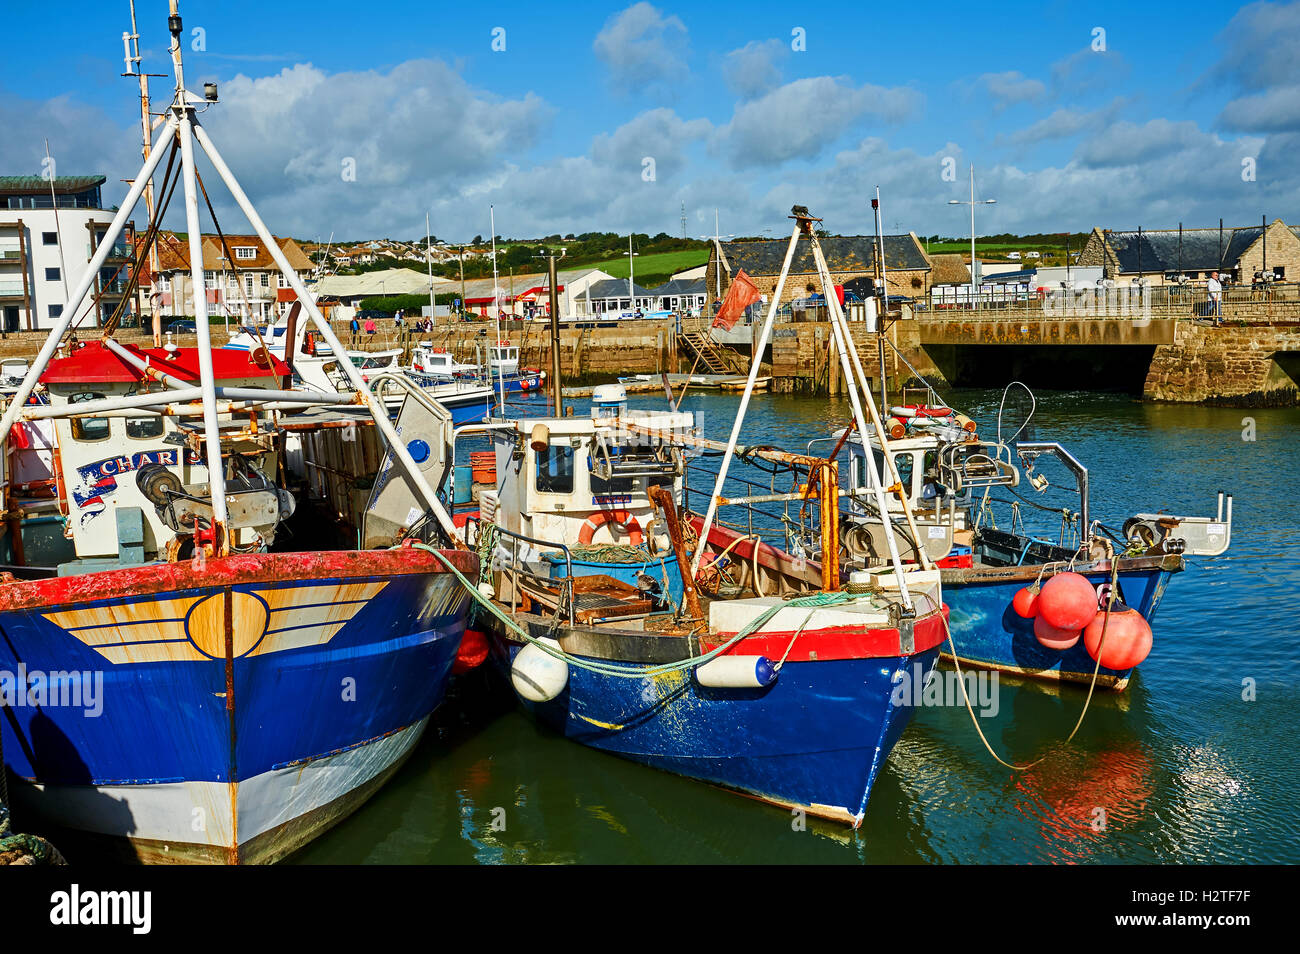 West Bay in Dorset is a small working harbour seen here with a mix of working fishing boats. The small harbour was central to the series Broadchurch. Stock Photo